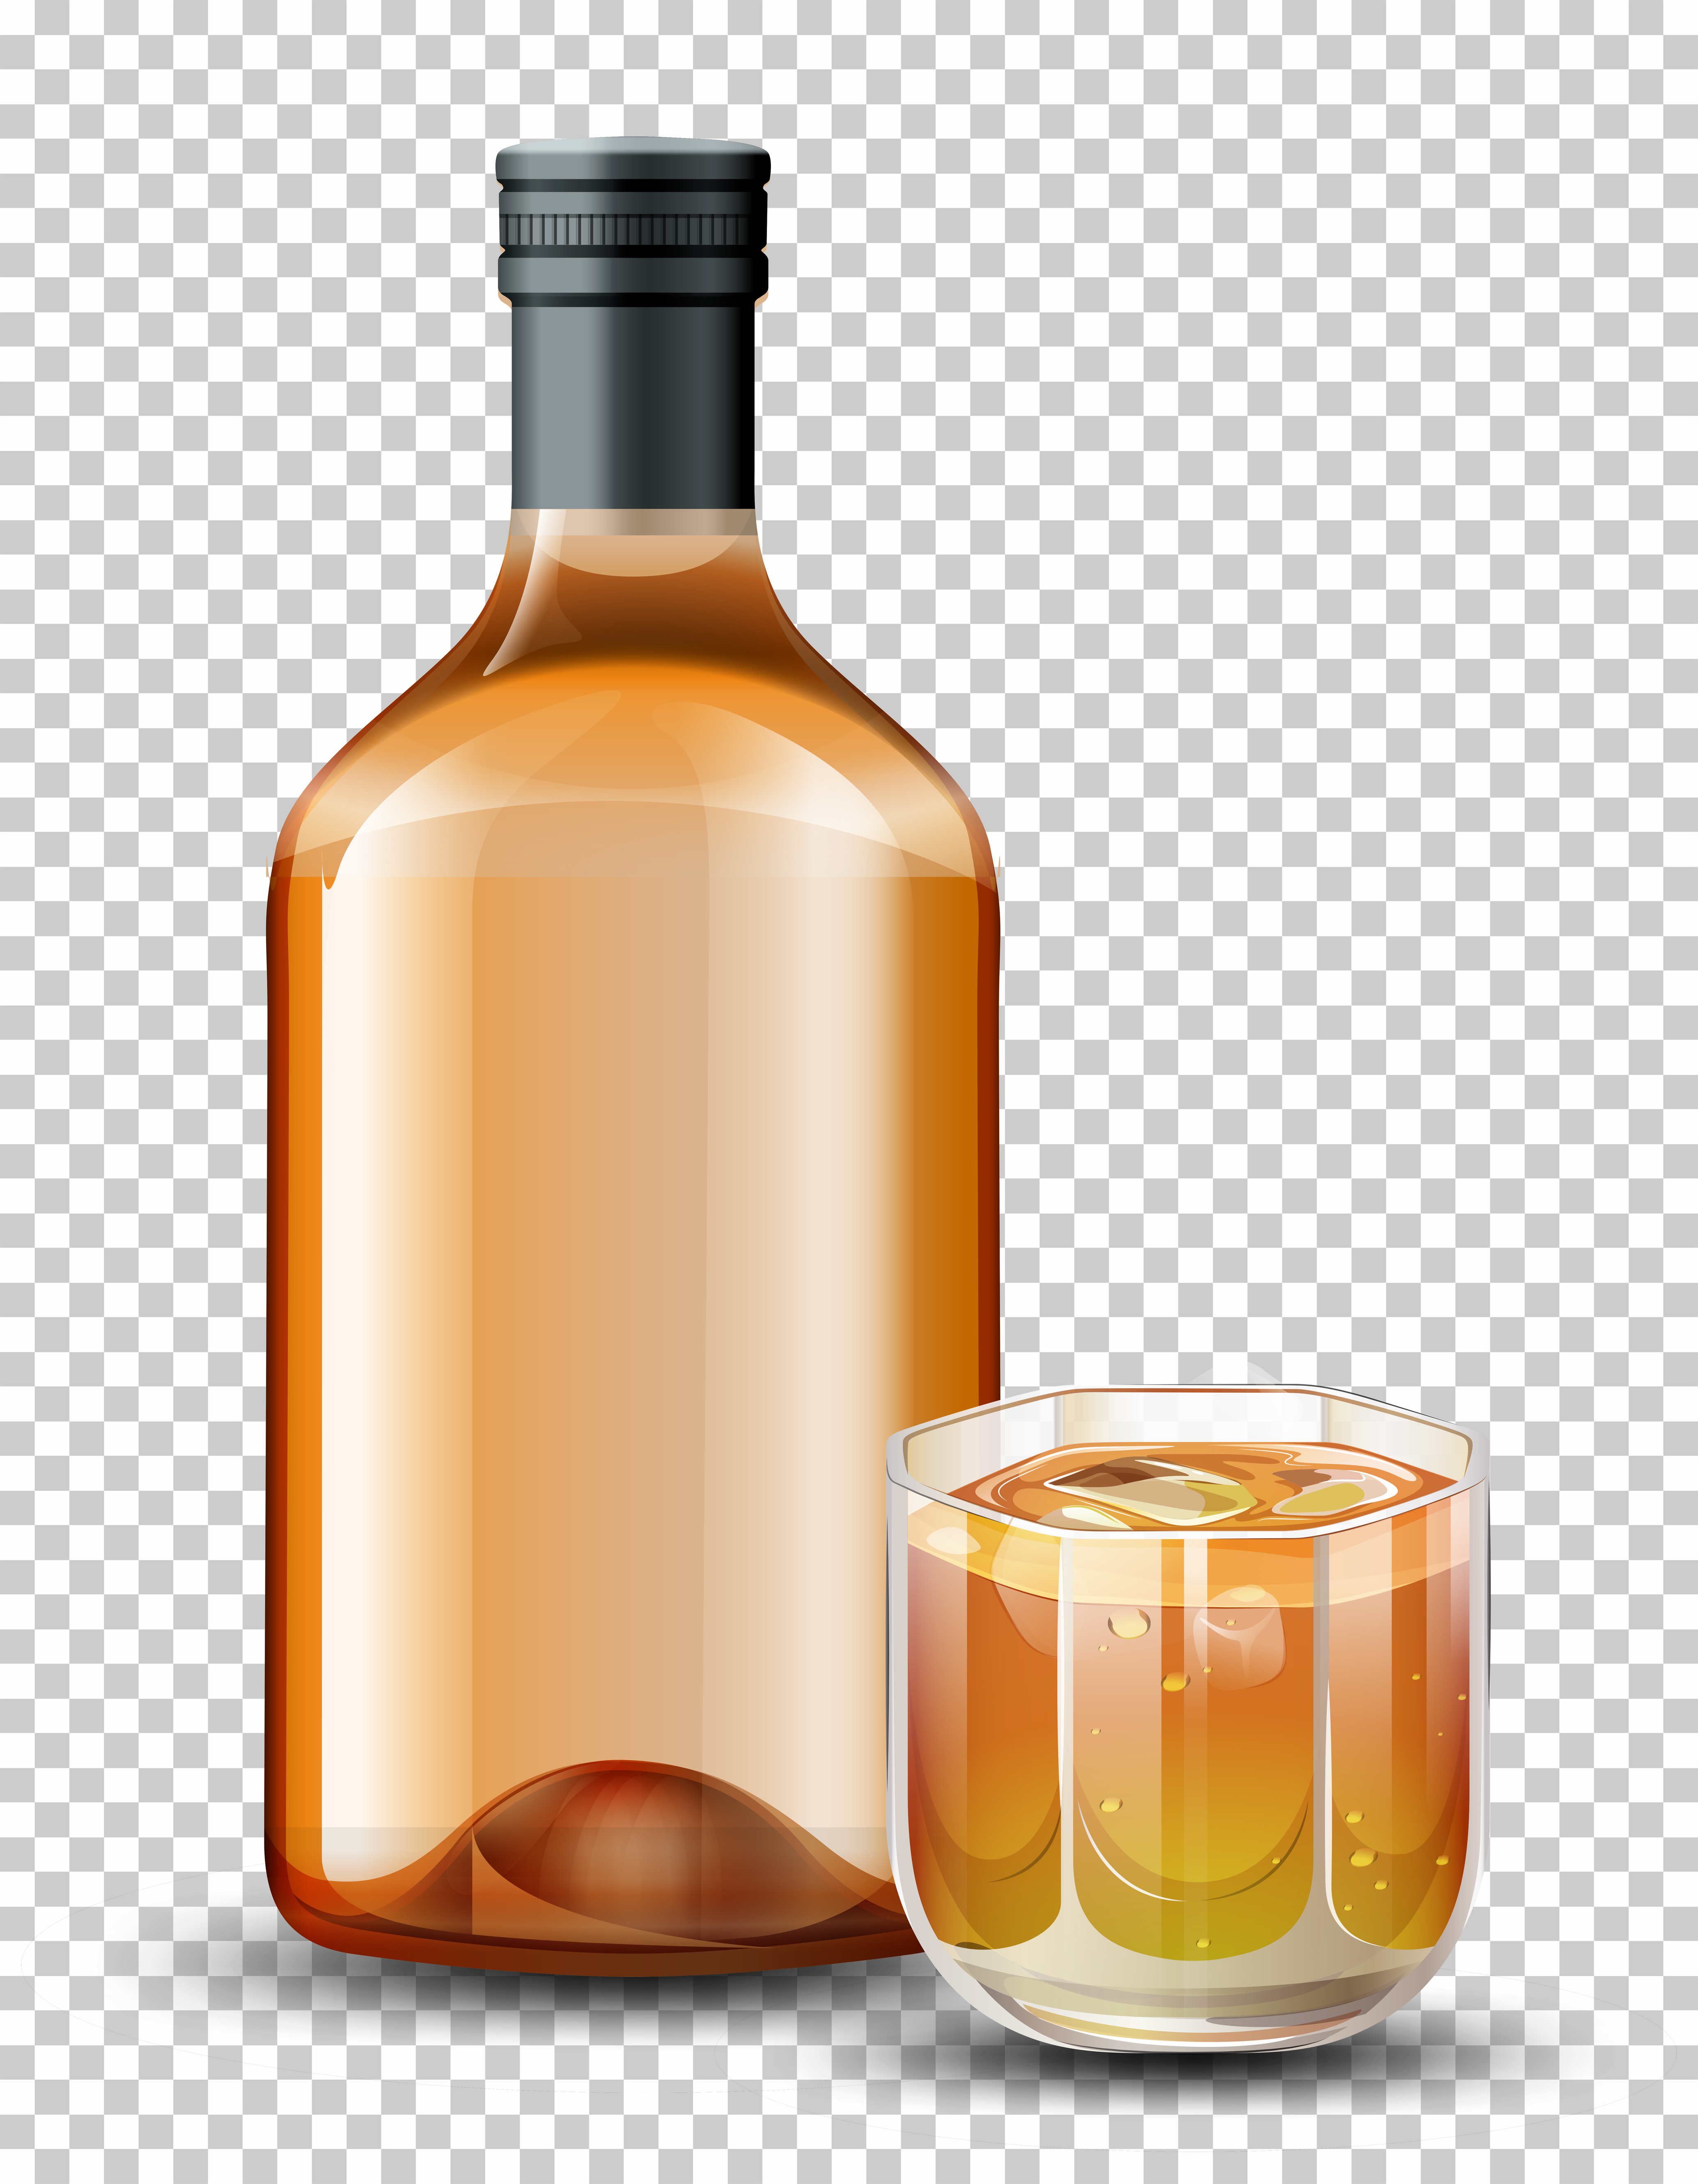 Bottle And Glass Of Whiskey 528390 Download Free Vectors Clipart.